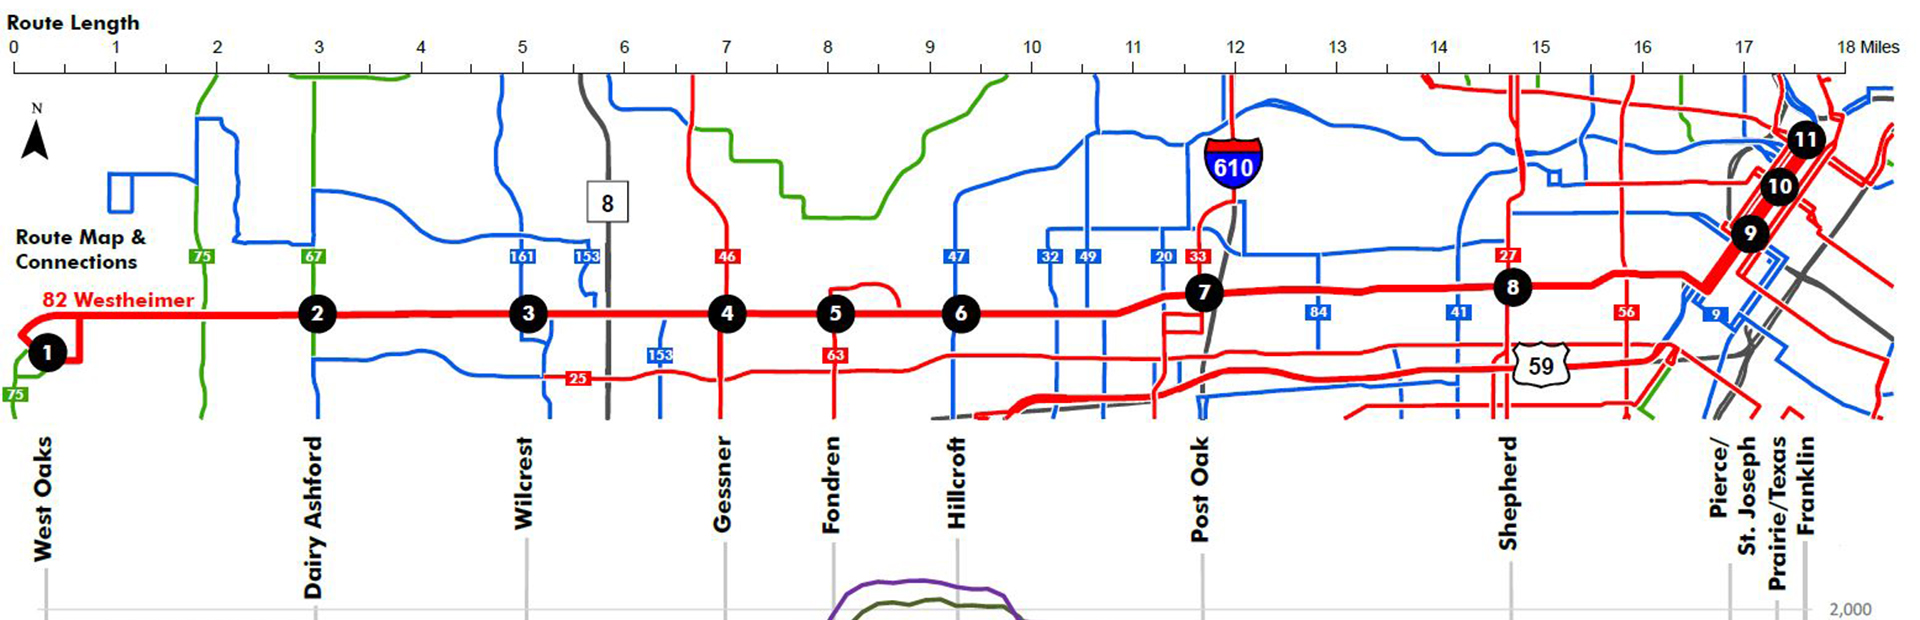 METRO Westheimer bus route map shows connections